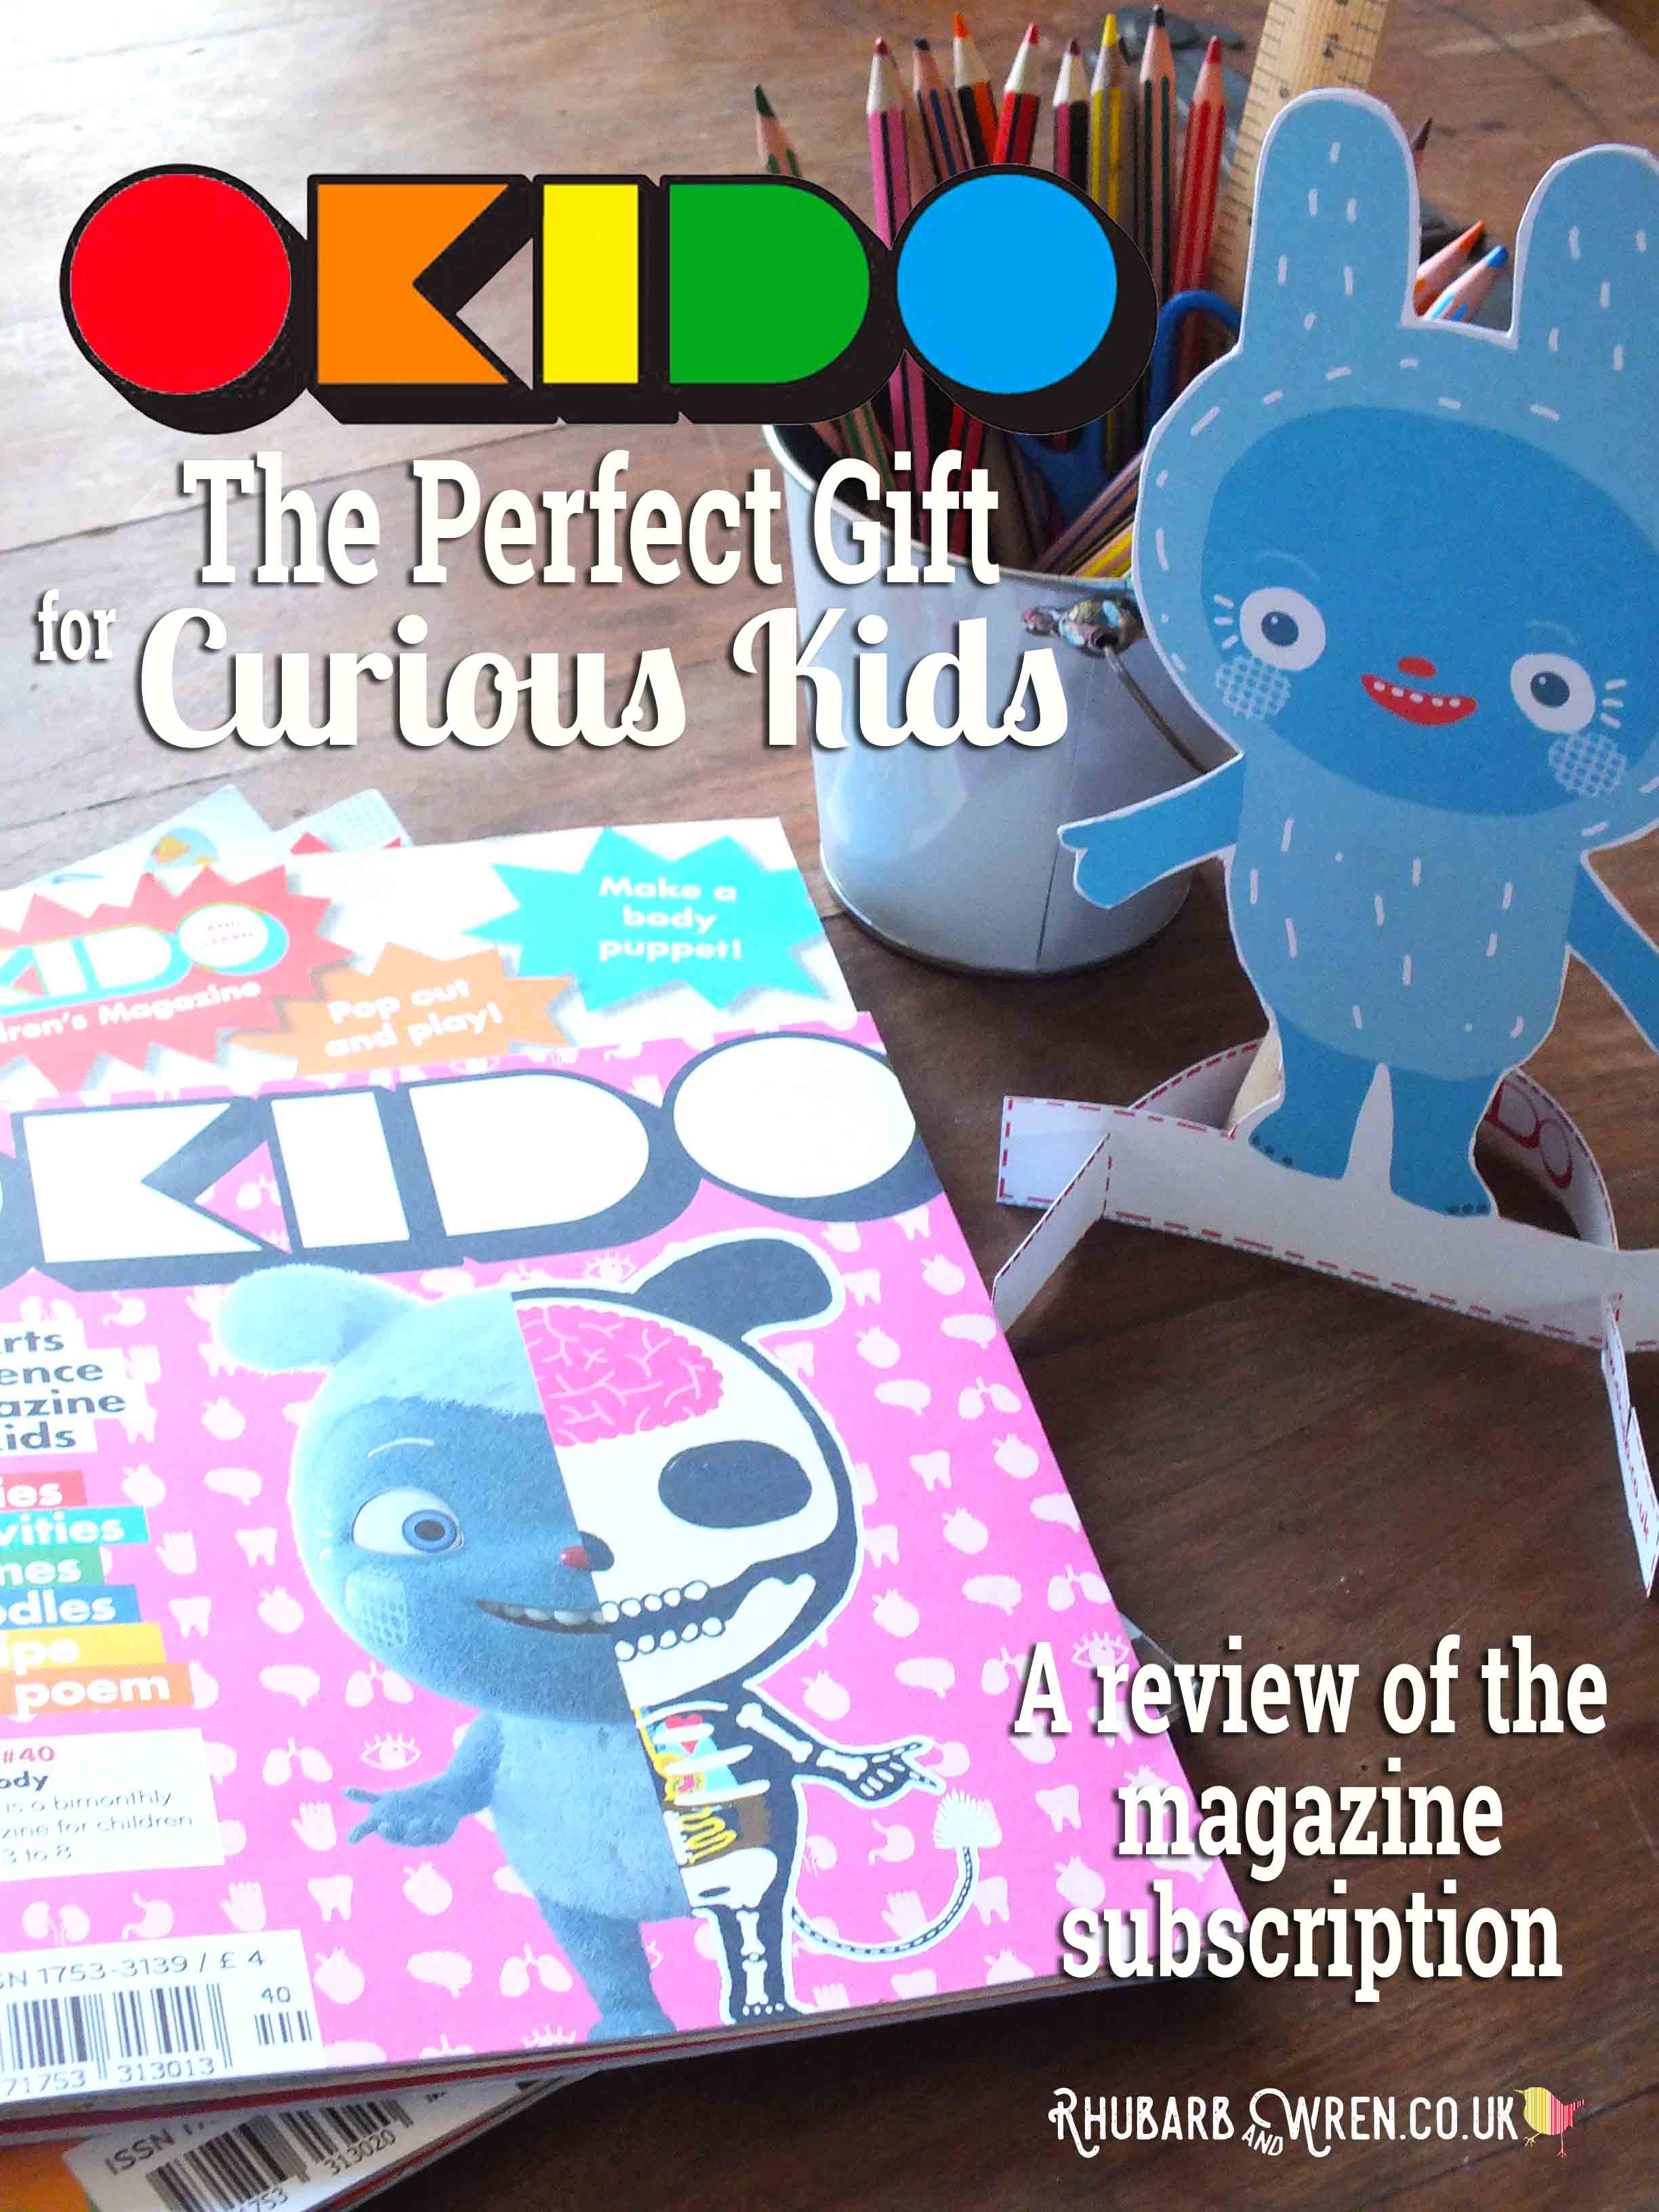 Okido Magazines and Messy Monster card cut-out. Text reads: 'The Perfect Gift for Curious Kids'